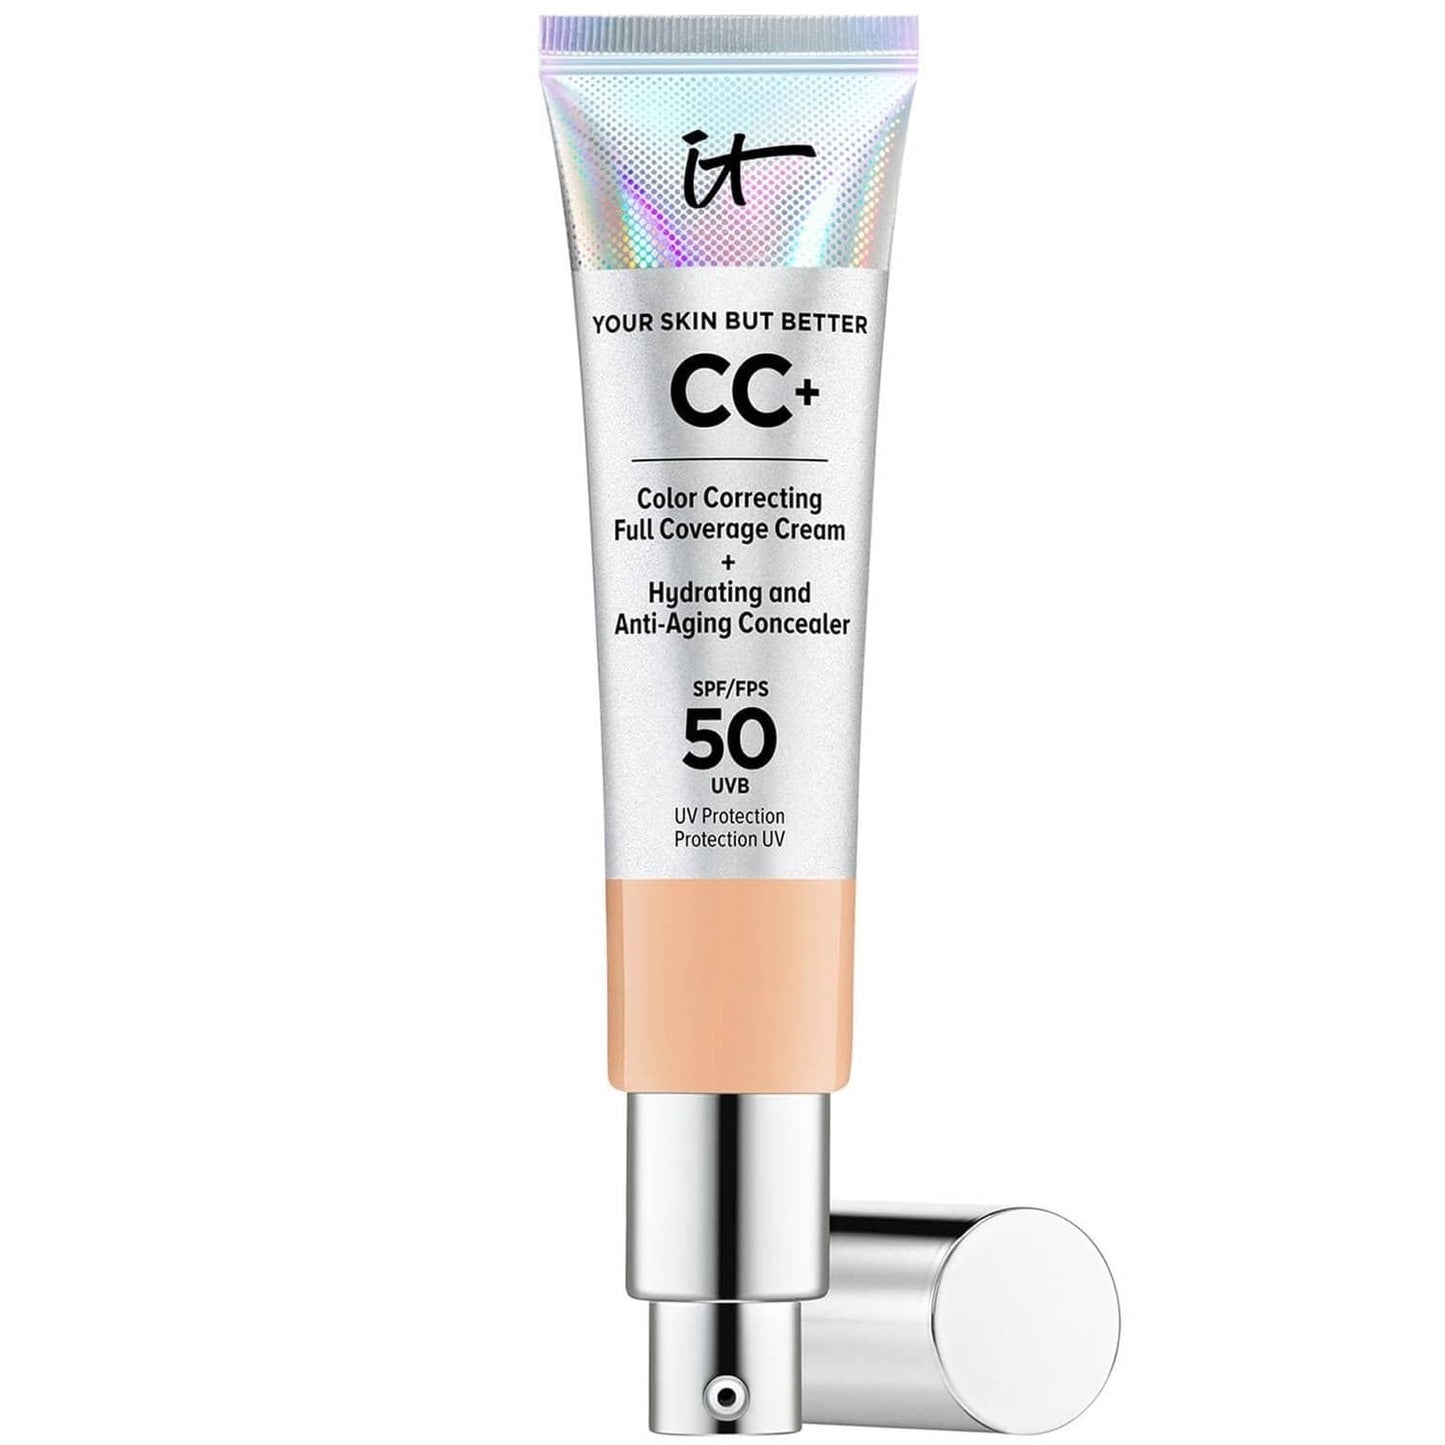 IT COSMETICS Beauty IT Cosmetics Your Skin But Better CC+ Cream with SPF50 32ml - Neutral Medium